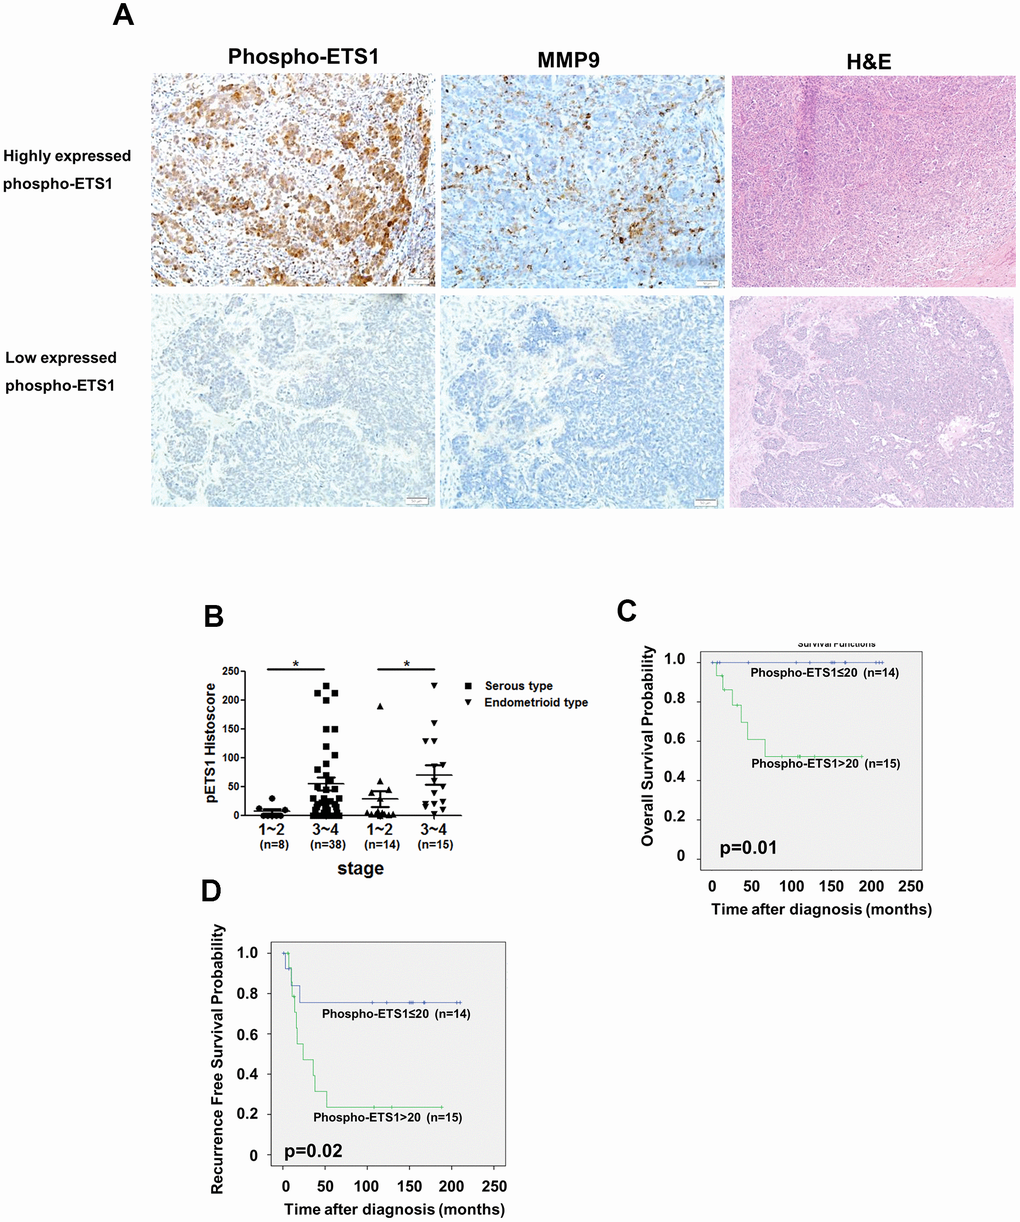 Phospho-ETS1 expression is associated with tumor stage. (A) Immunohistochemical staining of phospho-ETS1 and MMP-9 in ovarian cancer tissues. Tissue with high and low expressed phospho-ETS1 are shown in the upper and lower panels, respectively. (B) Advanced-stage malignancies (stages 3−4) showed a higher immunohistochemical expression of phospho-ETS1 as compared with early-stages tumors (stages 1−2) both in serous (black square) and endometrioid (black triangle) ovarian carcinomas. Asterisks in B denote statistical significance (*p C) and recurrence-free survival (D) in endometrioid type ovarian cancer patients (n = 29) were constructed according to phospho-ETS1 histoscores. The optimal cutoff for phospho-ETS1 histoscore in the prediction of overall survival and recurrence-free survival was 20.